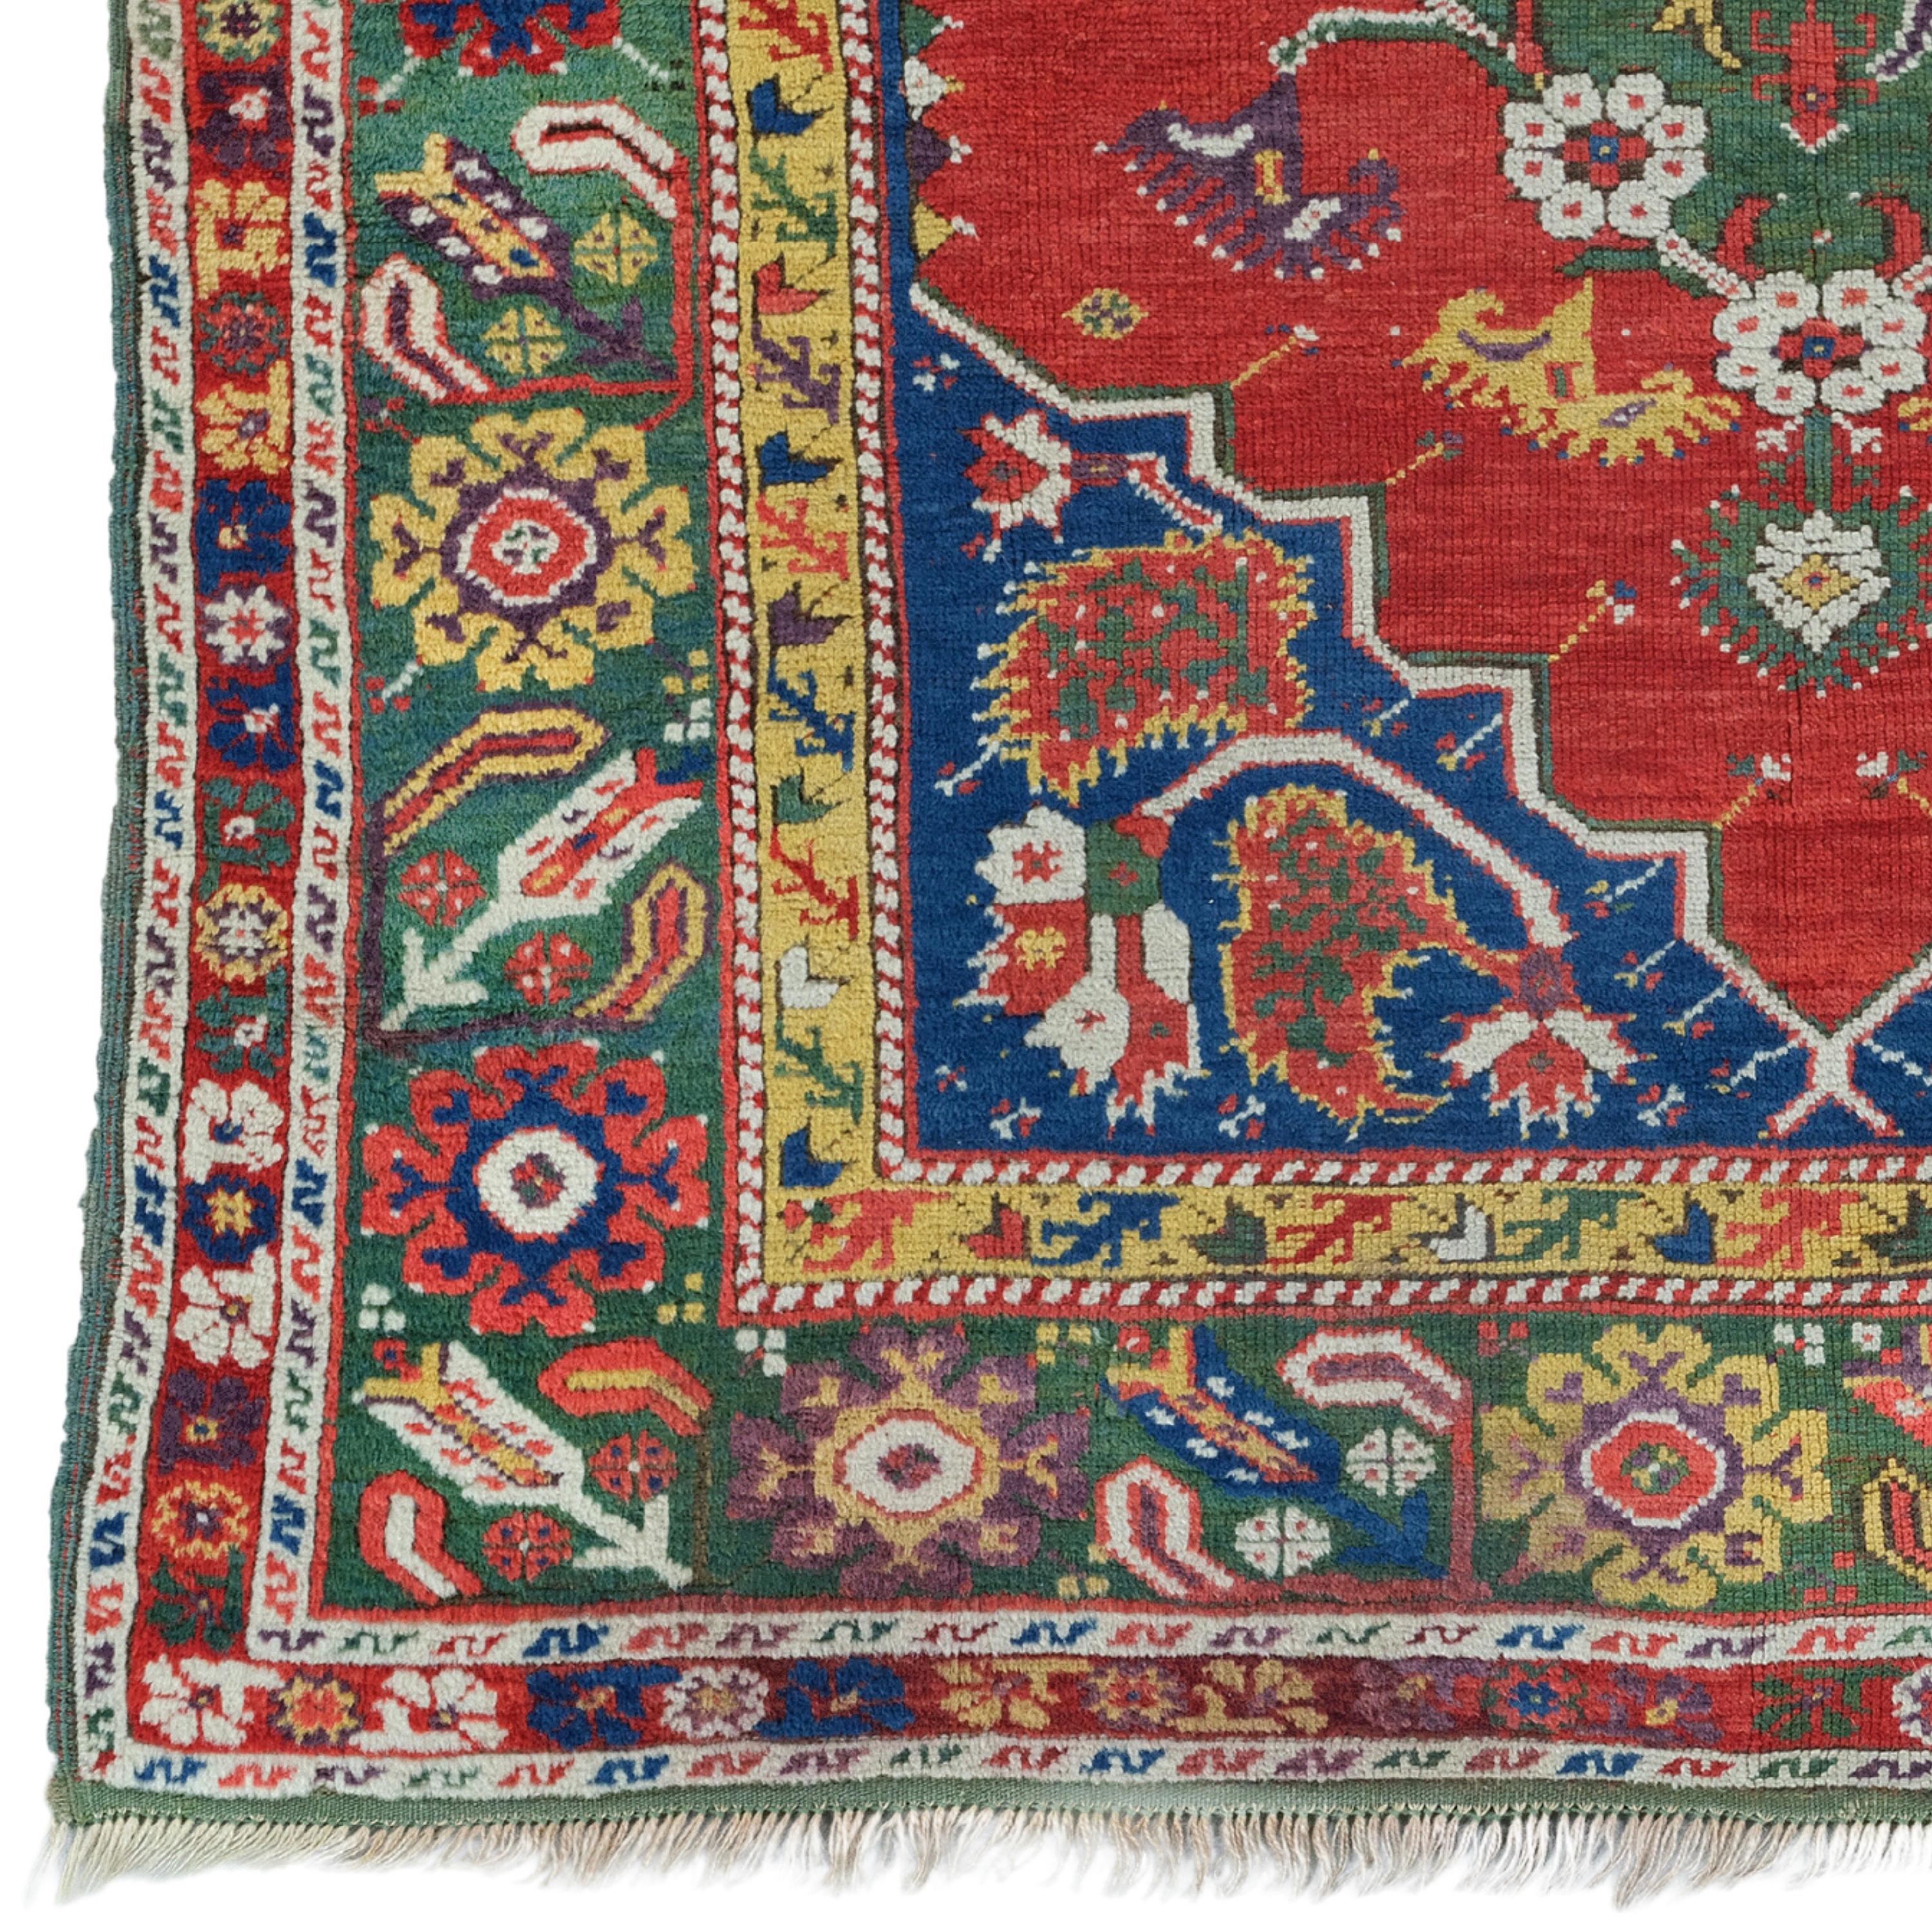 A Timeless Weaving Wonder This elegant 18th century antique Ushak carpet attracts attention with its rich color palette and intricate patterns. The central medallion and surrounding floral motifs reflect the high-quality weaving techniques typical